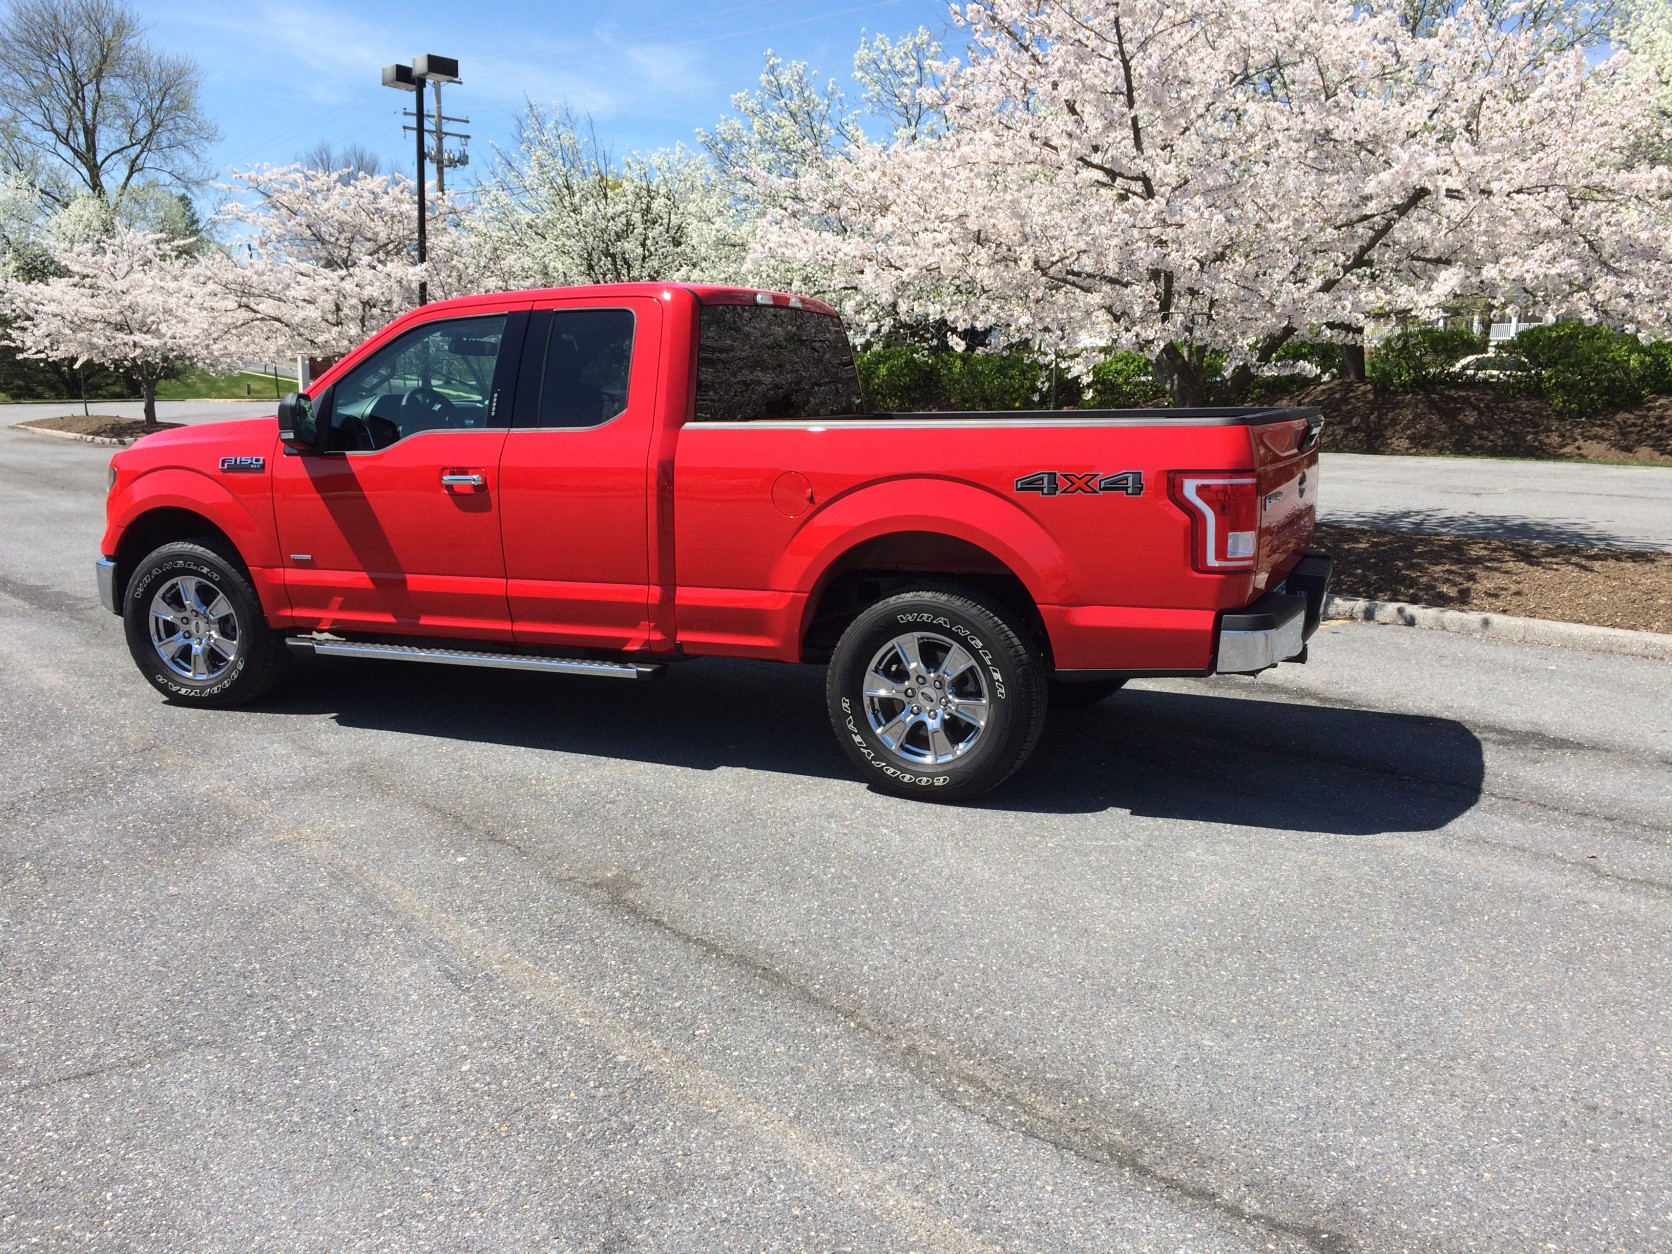 With five trim levels, three cab and bed lengths, a choice of rear or four-wheel drive and a price starting around $26,000, there is a Ford truck for just about anyone looking for America’s most popular vehicle. (WTOP/Mike Parris)